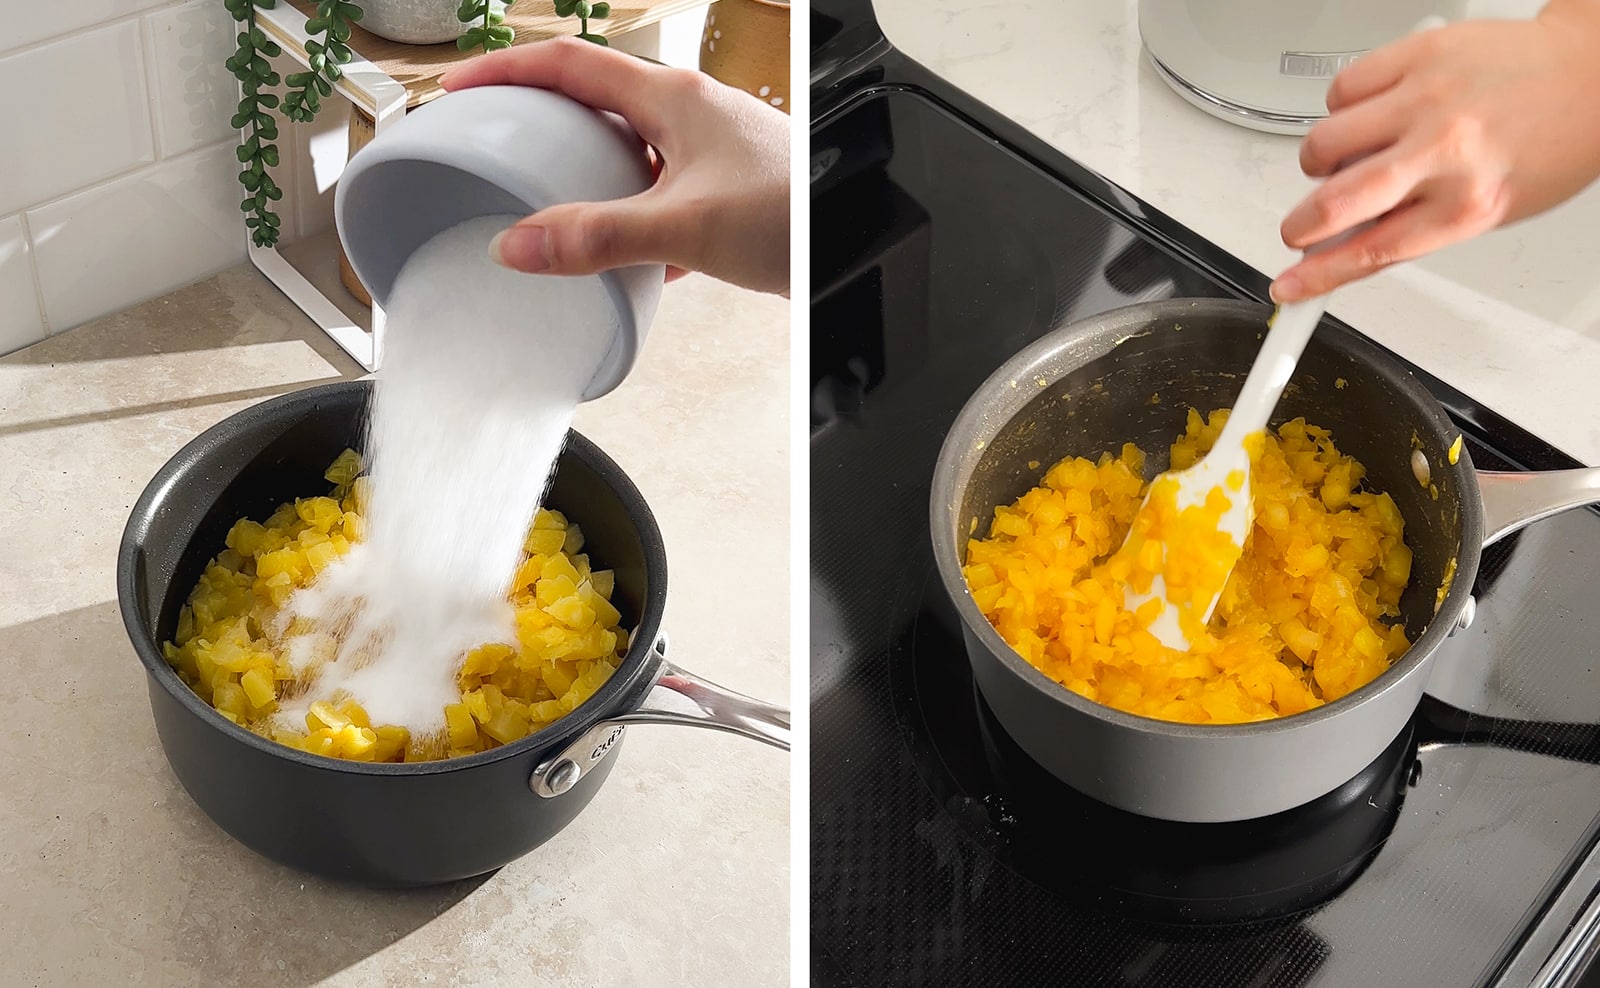 Left to right: pouring sugar into pot of crushed pineapple, stirring caramelized pineapple in a pot.